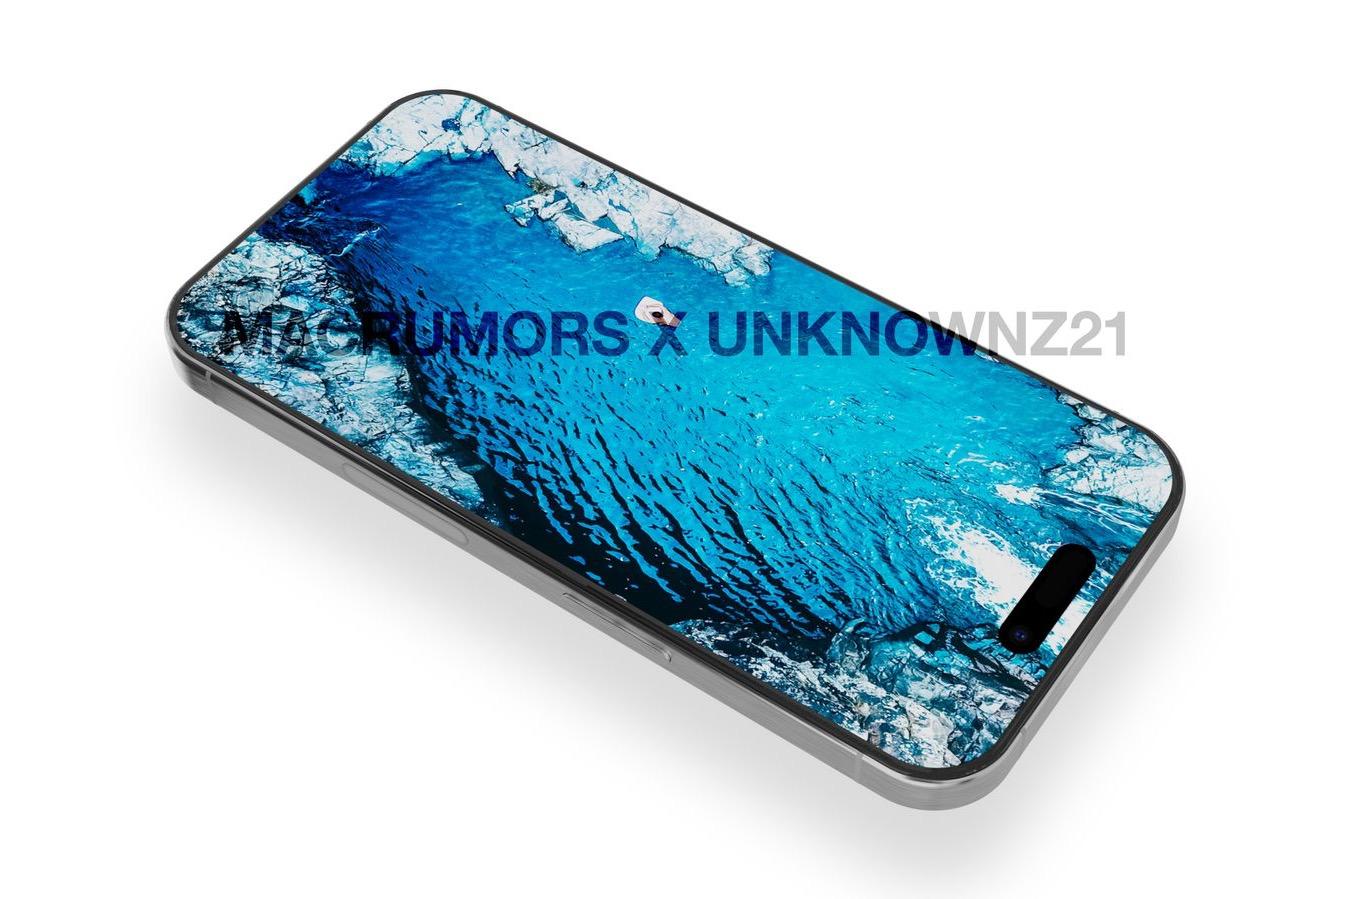 New iPhone Pro Renders Show A Surprising Design Change